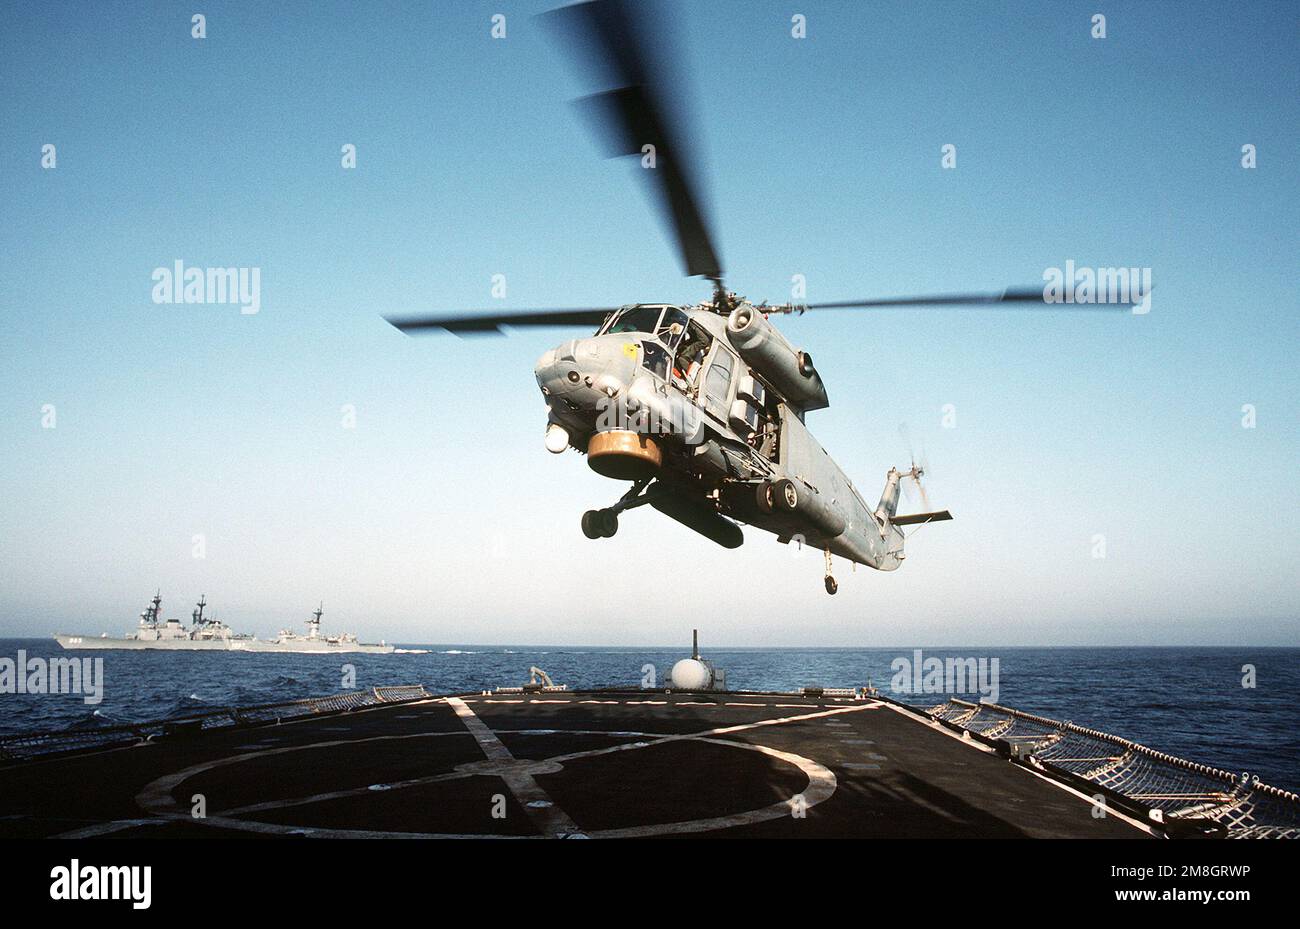 A Light Helicopter Anti-submarine Squadron 33 (HSL-33) SH-2F Sea Sprite helicopter lands on the flight deck of the frigate USS FANNING (FF-1076) during Exercise Eager Sentry 92-4. The destroyer USS KINDAID (DD-965) and the frigate USS KIRK (FF-1087) are in the background. Subject Operation/Series: EAGER SENTRY 92-4 Base: USS Fanning (FF 1076) Stock Photo